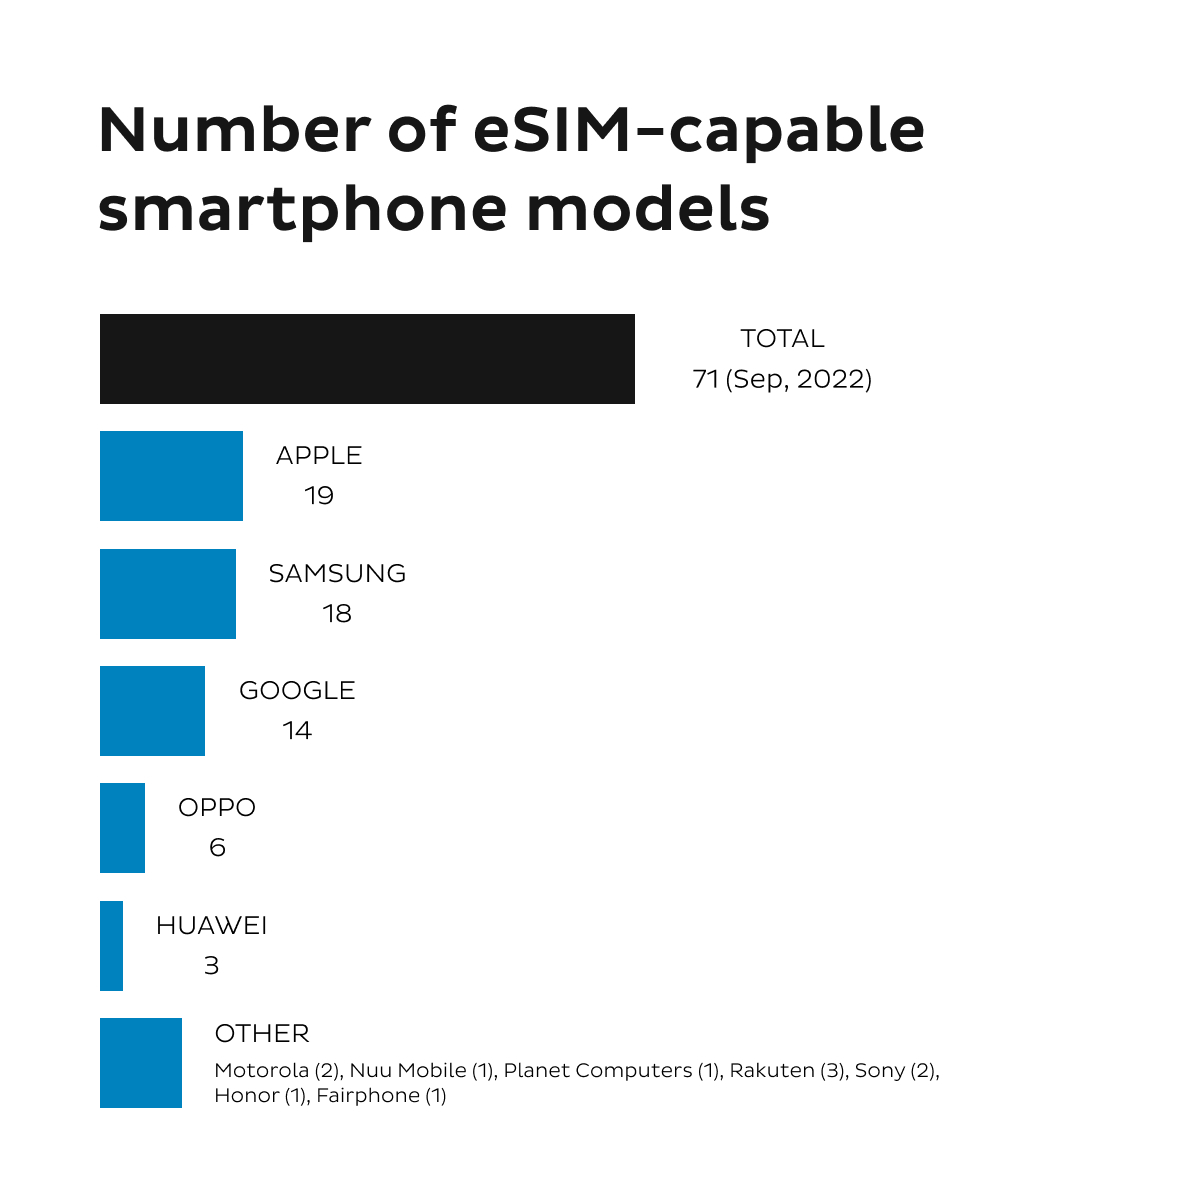 Infographic showing the number of eSIM-capable smartphone models by brand